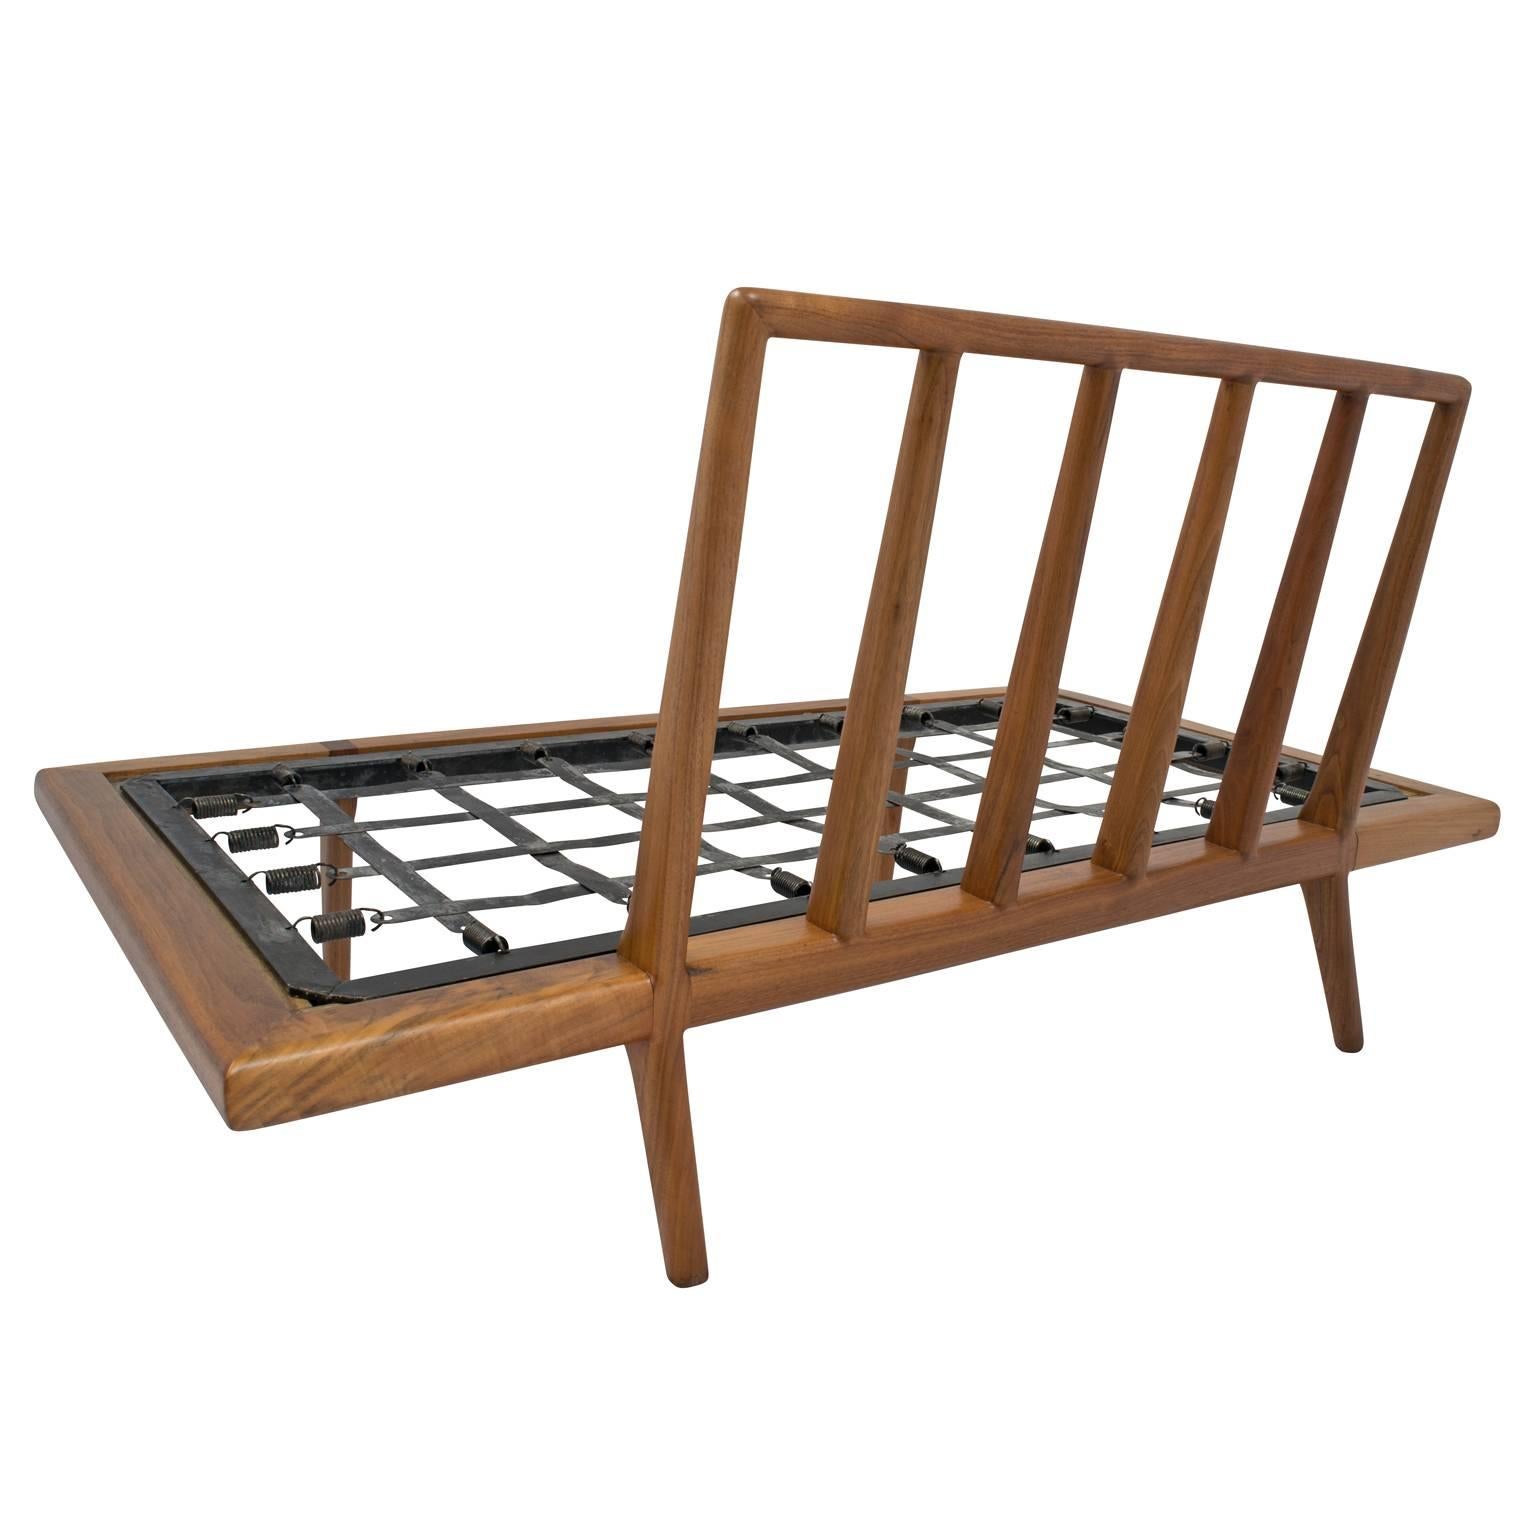 Mel Smilow Long Low Chair Frame in Walnut for Smilow-Thielle For Sale